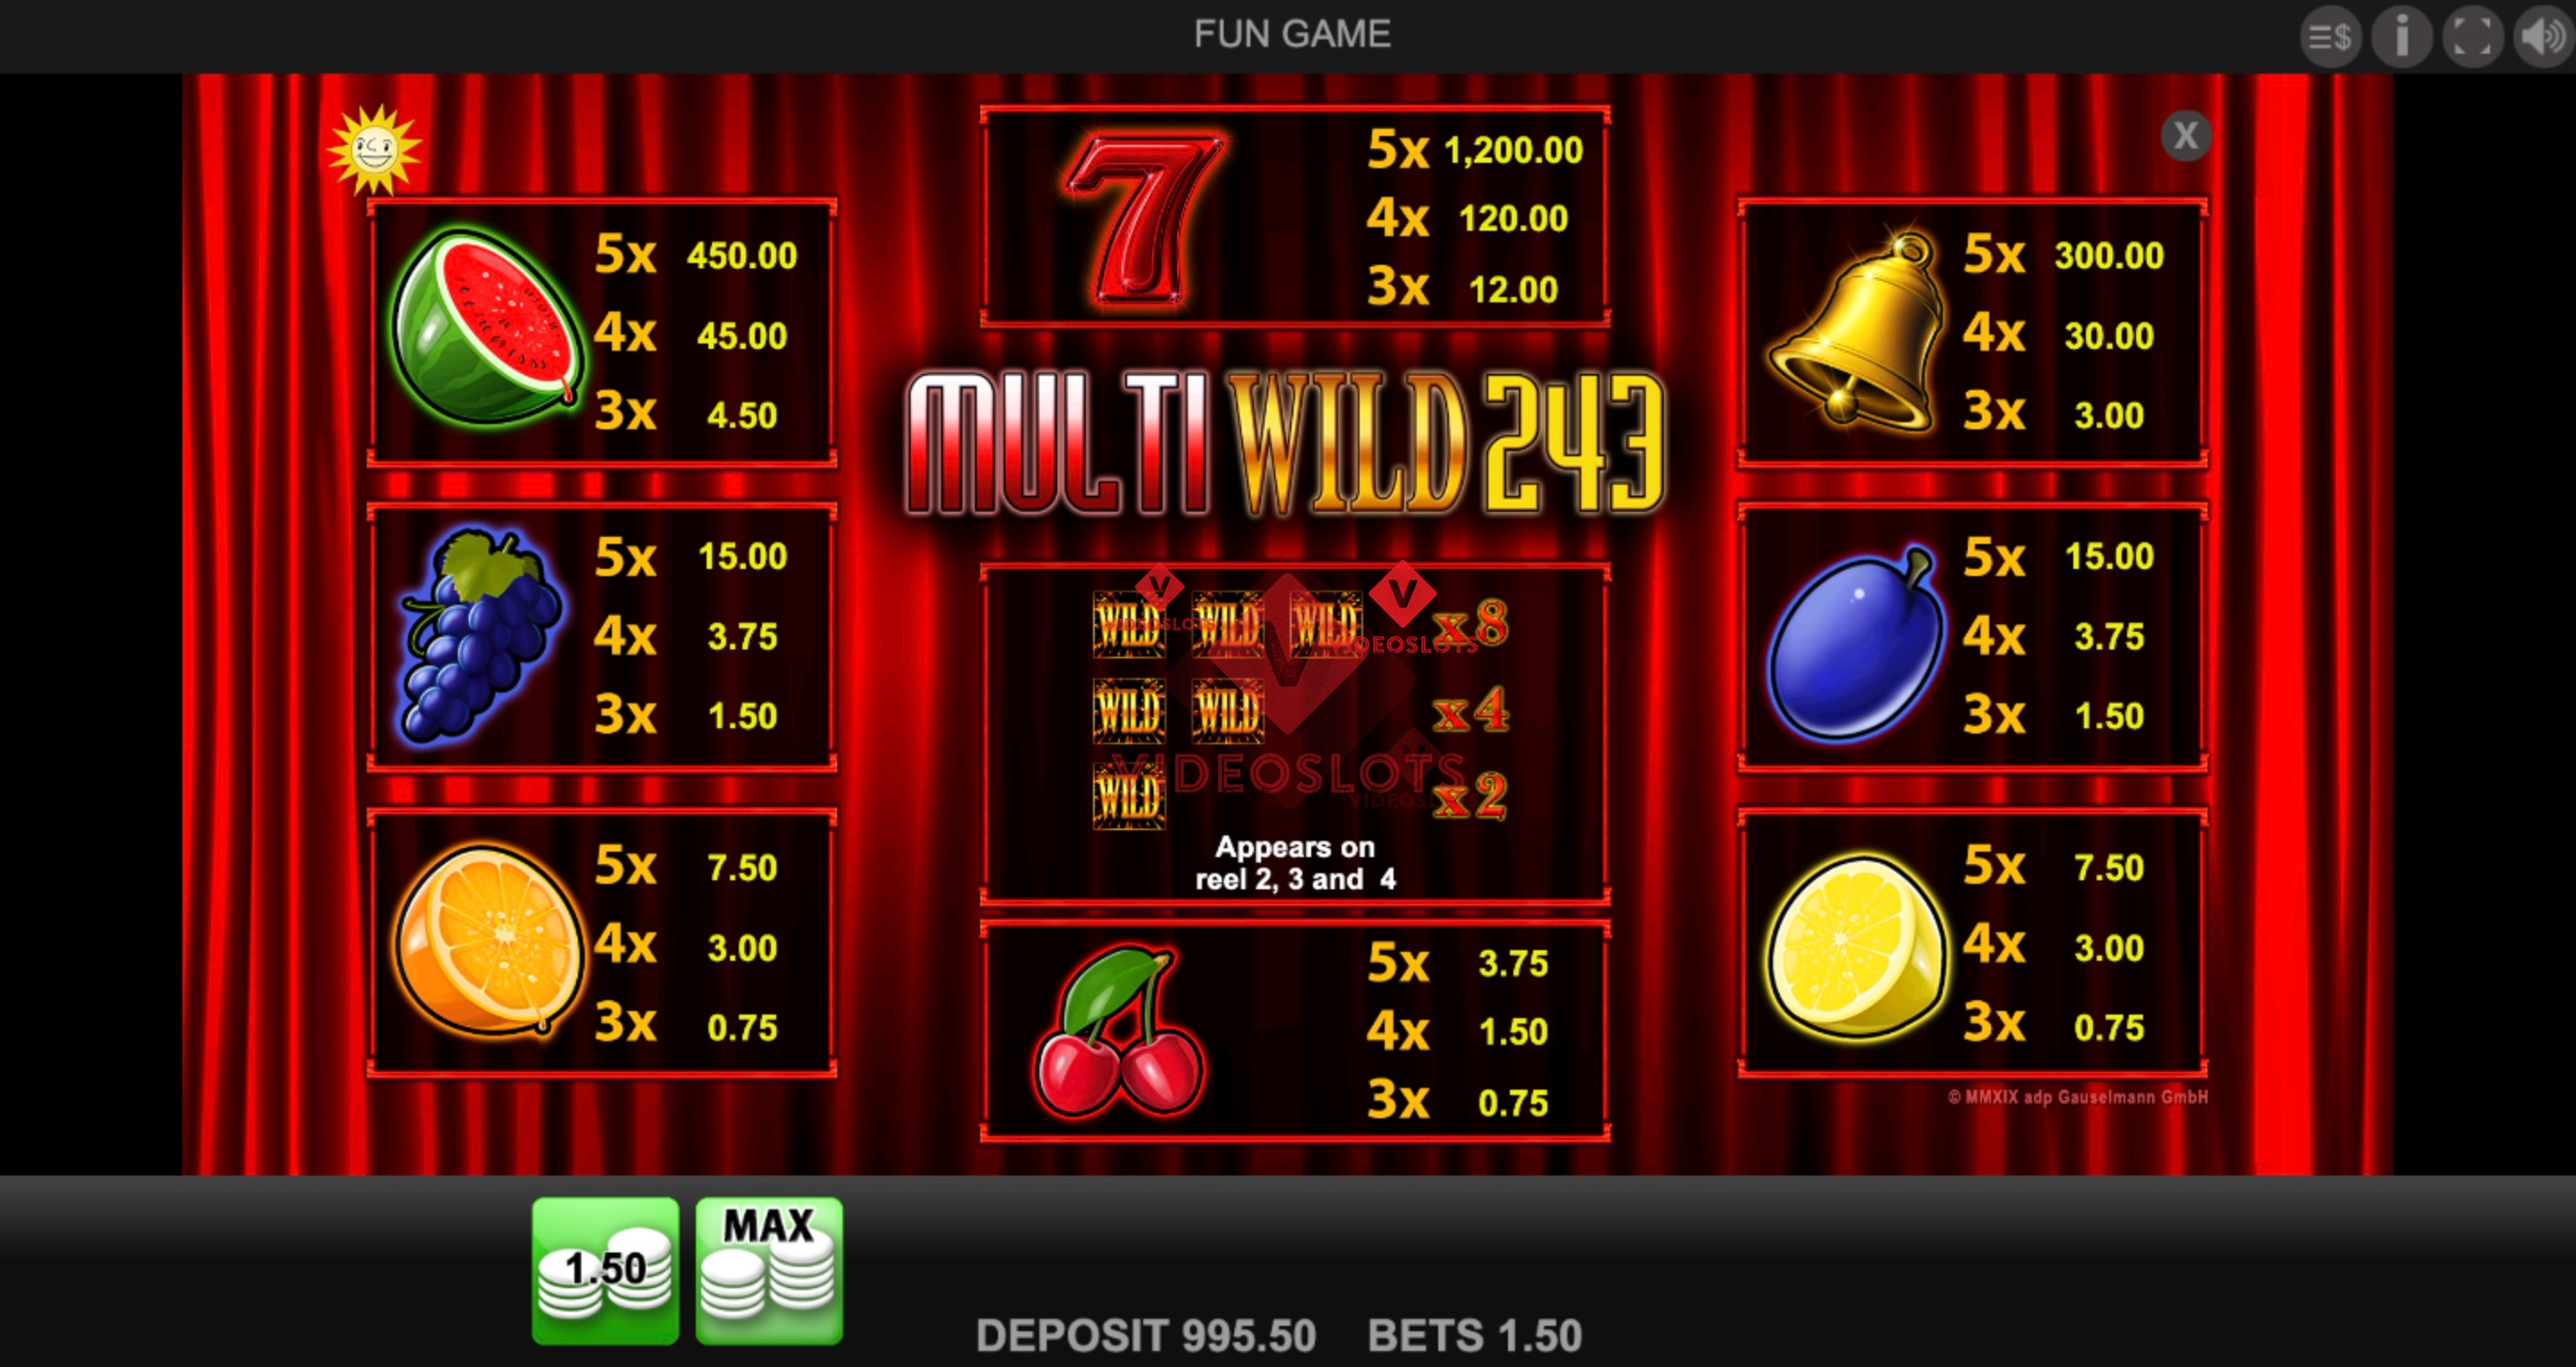 Pay Table for Multi Wild 243 slot from Merkur